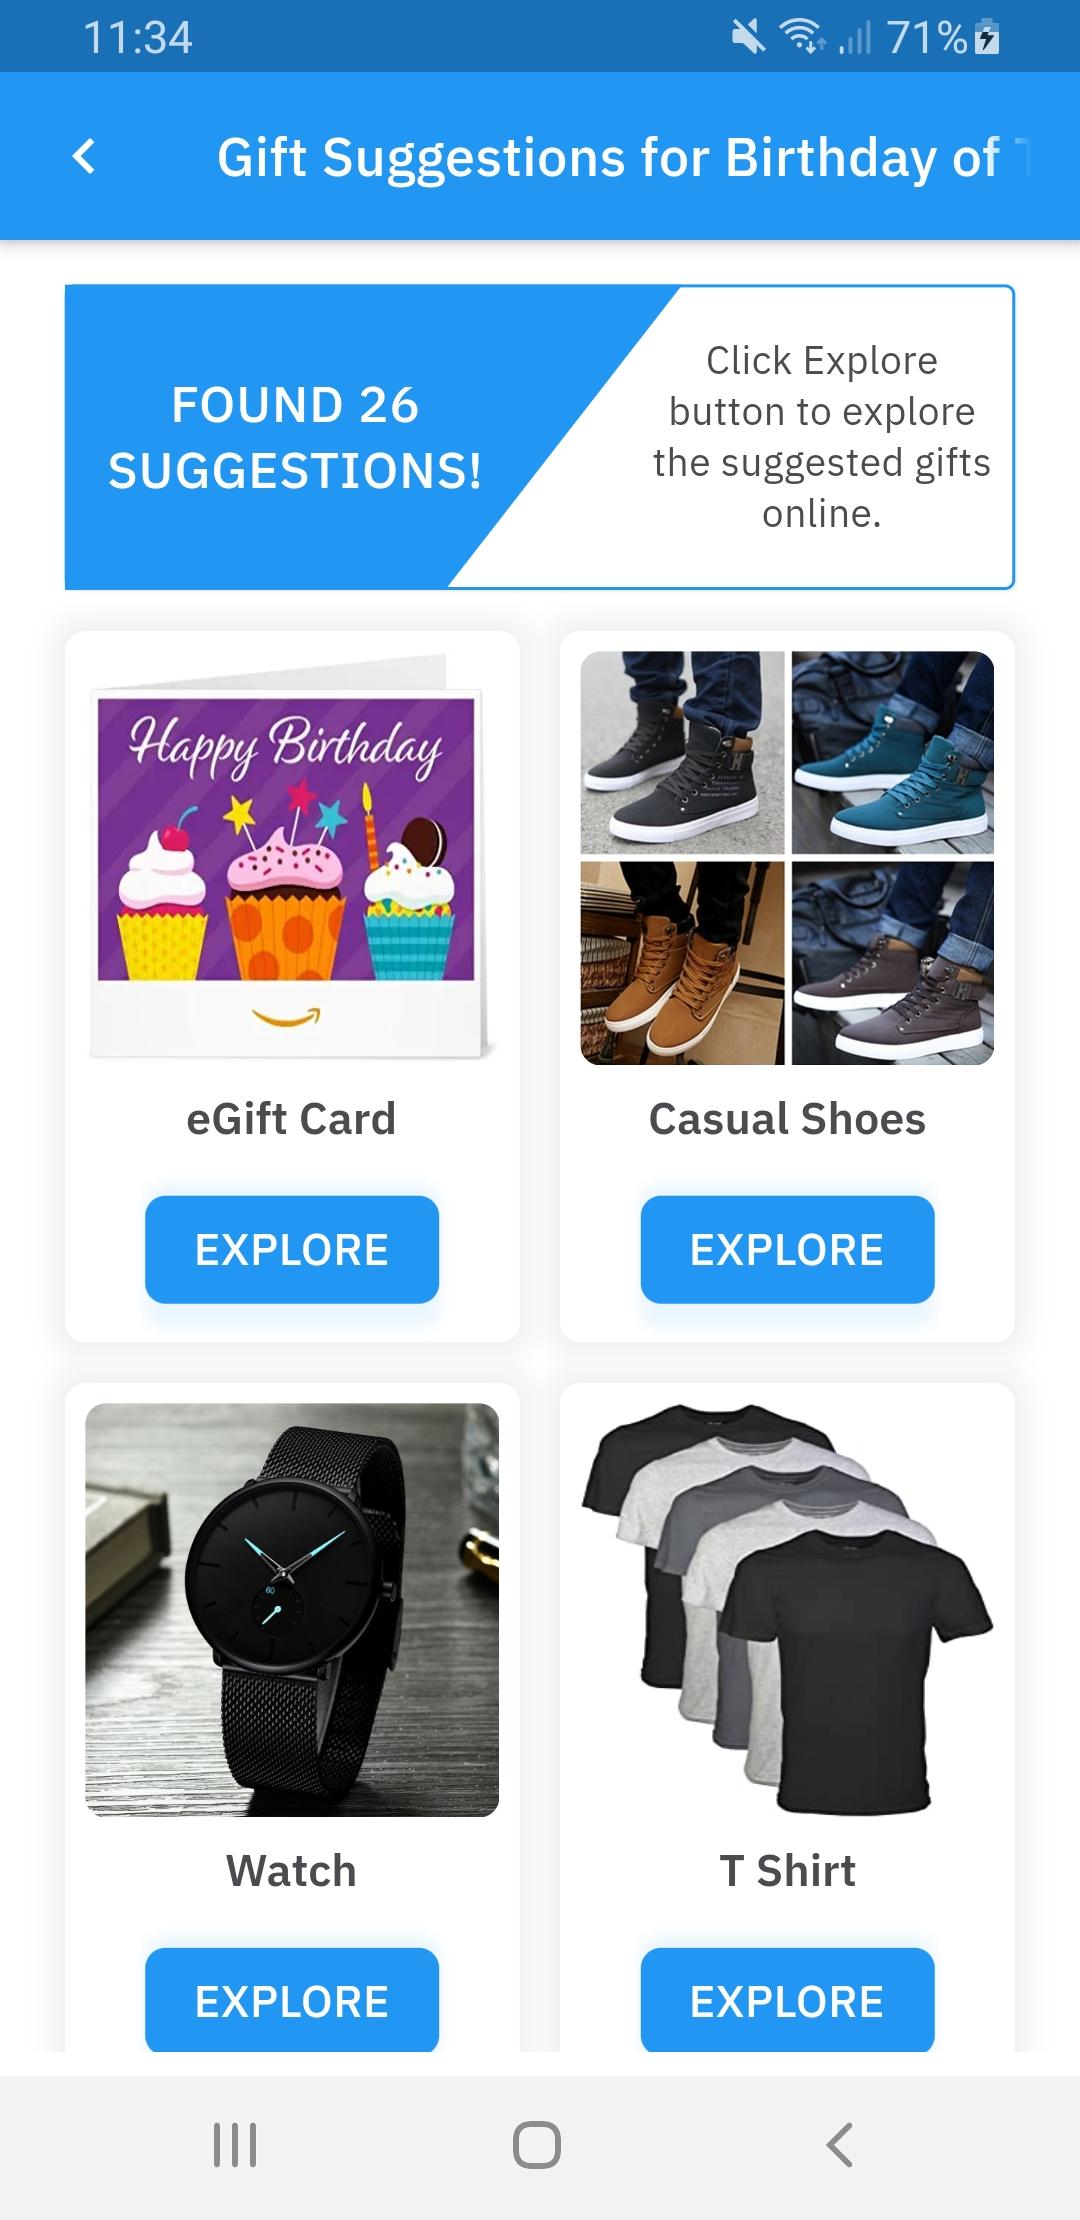 GIFTLY - Gift Ideas & Suggestions 1.0.2 Screenshot 4